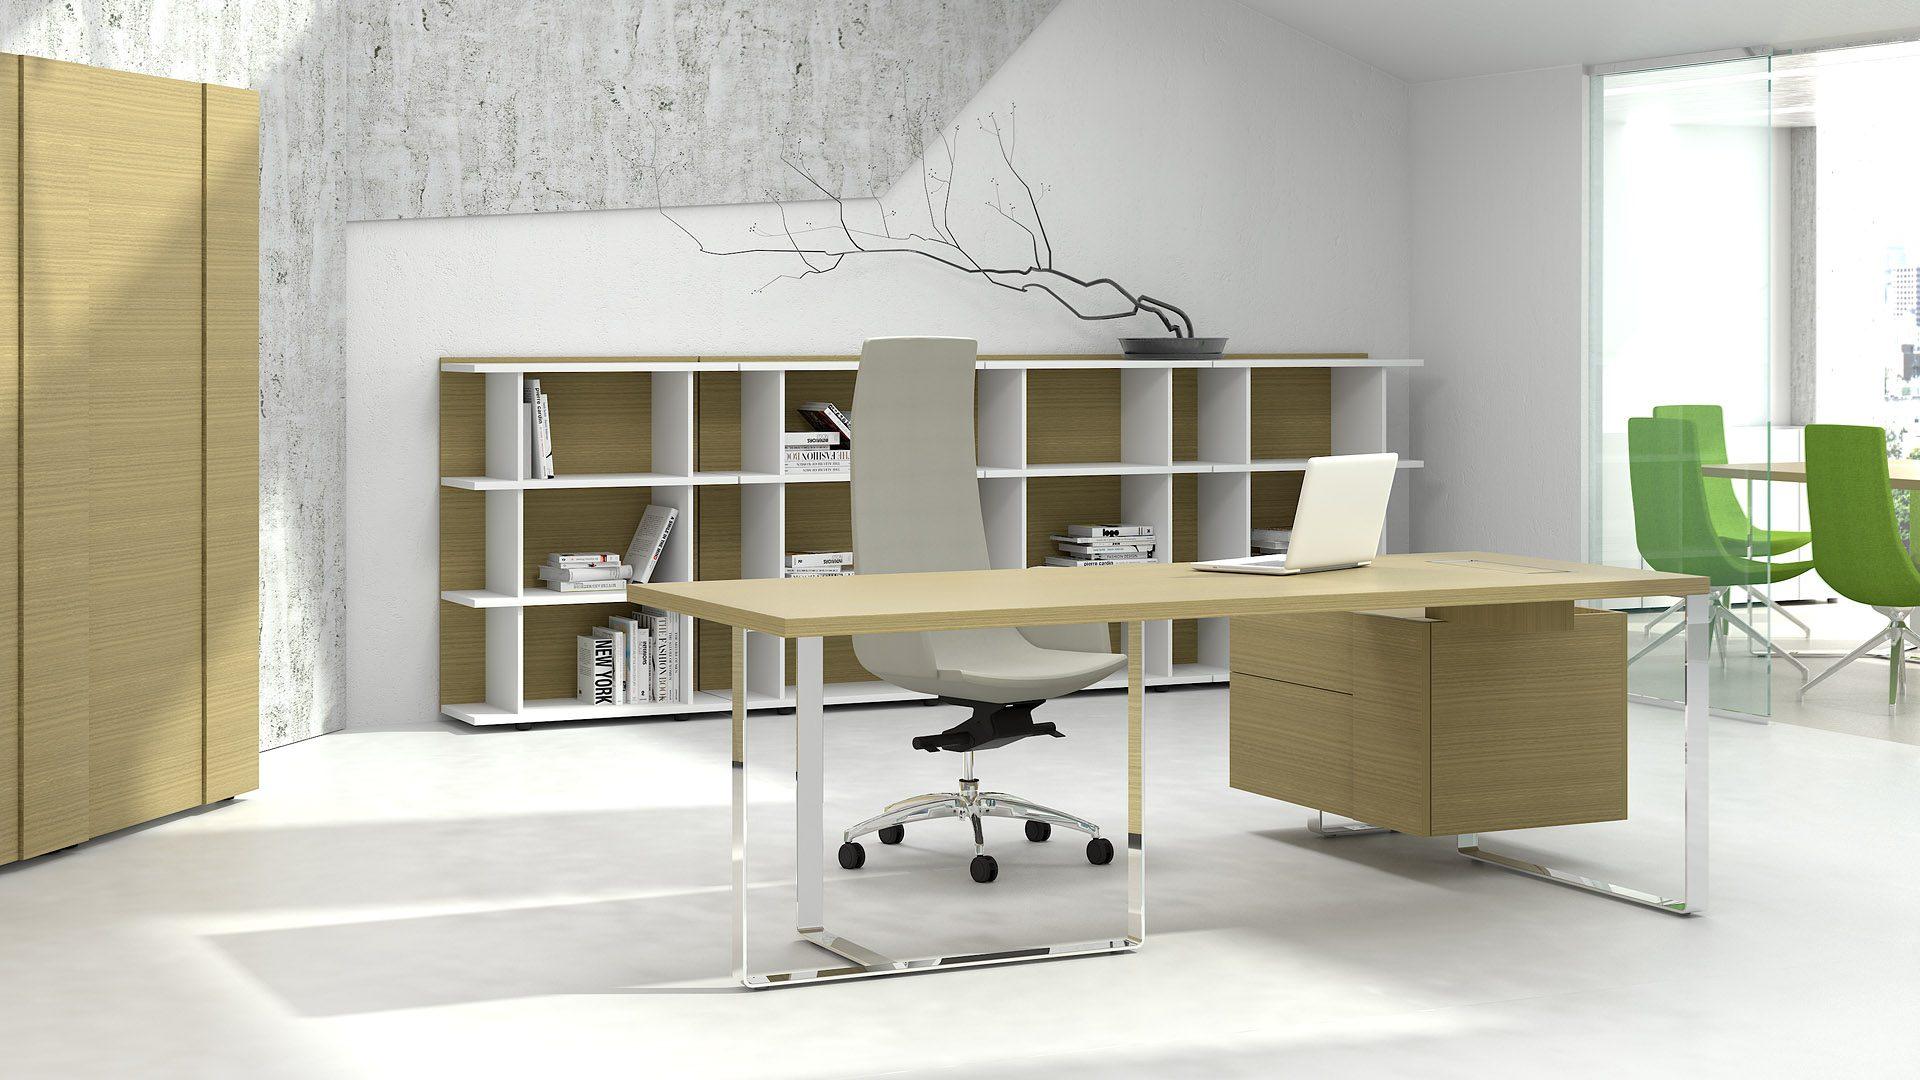 The Plana executive furniture range includes desks with storage, shelves and meeting tables